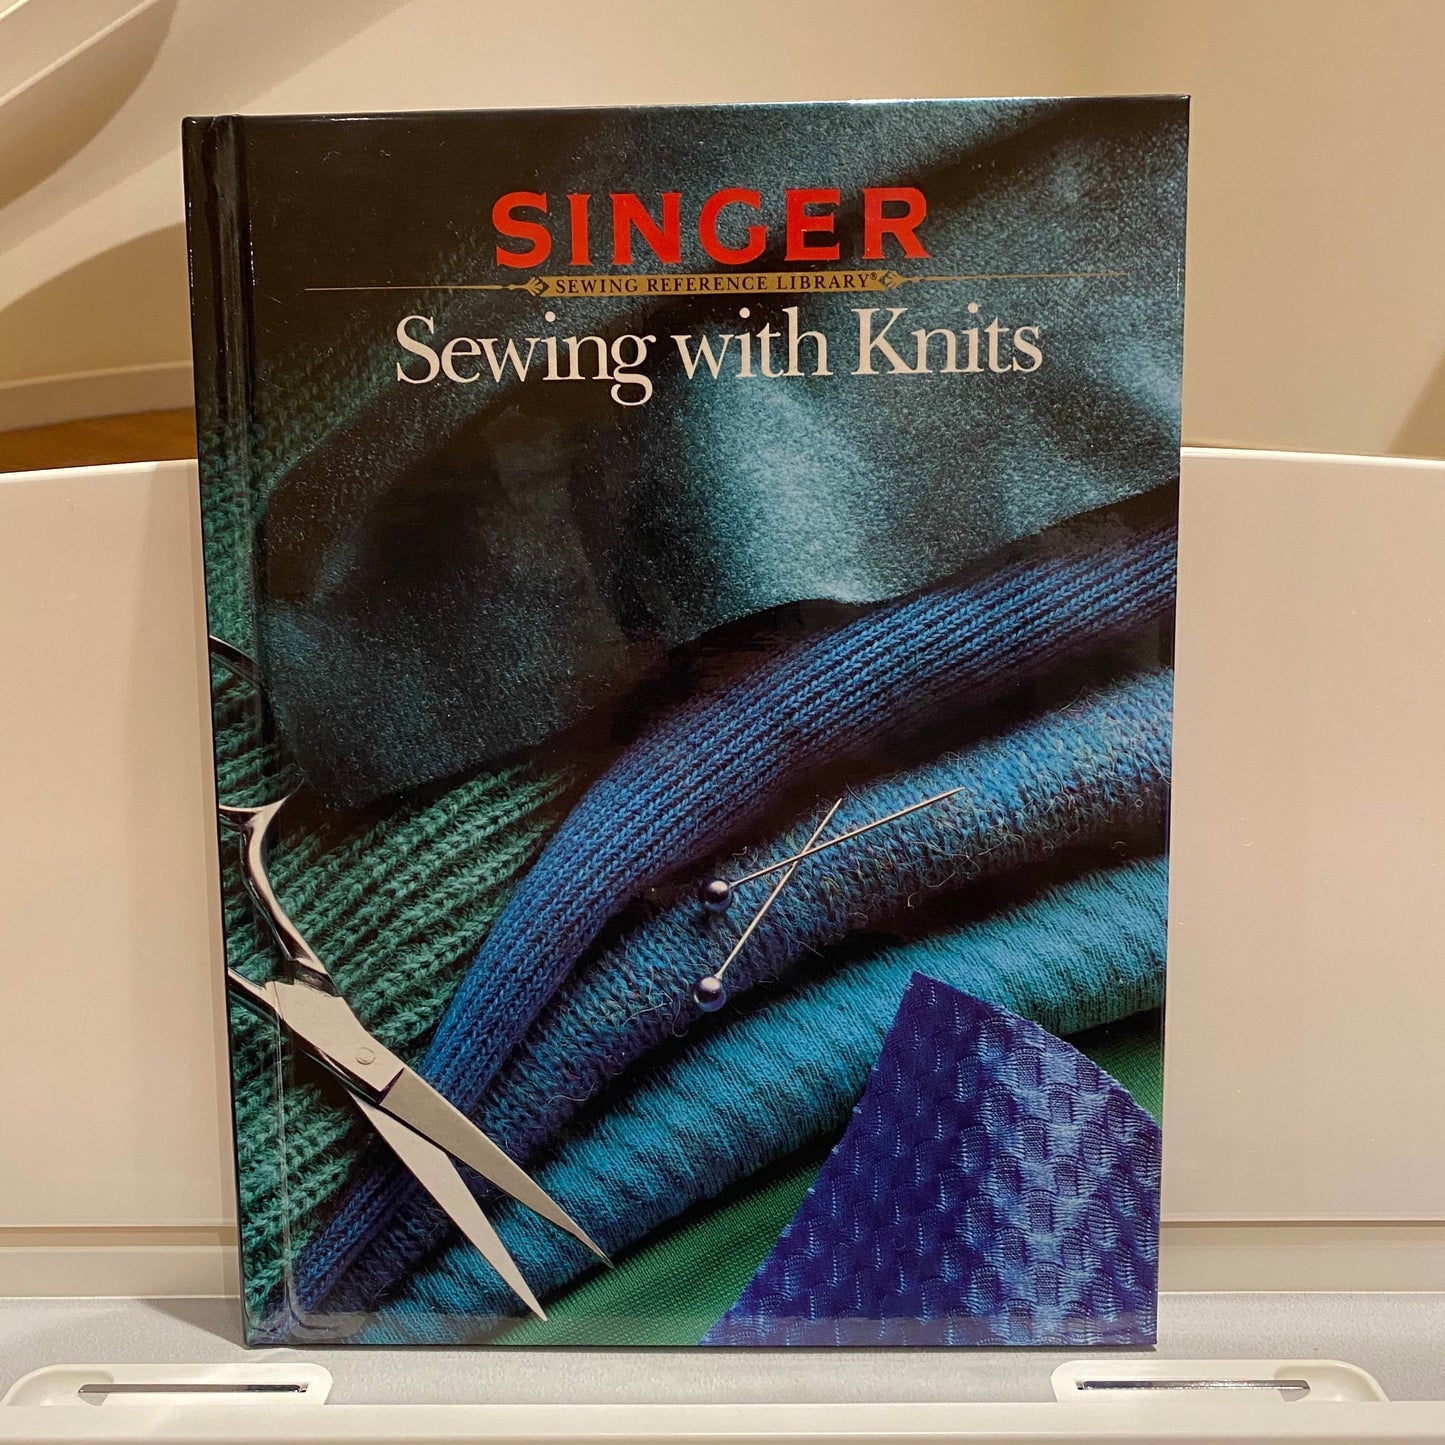 Singer Sewing Reference Library - Sewing with Knits (hardback book)